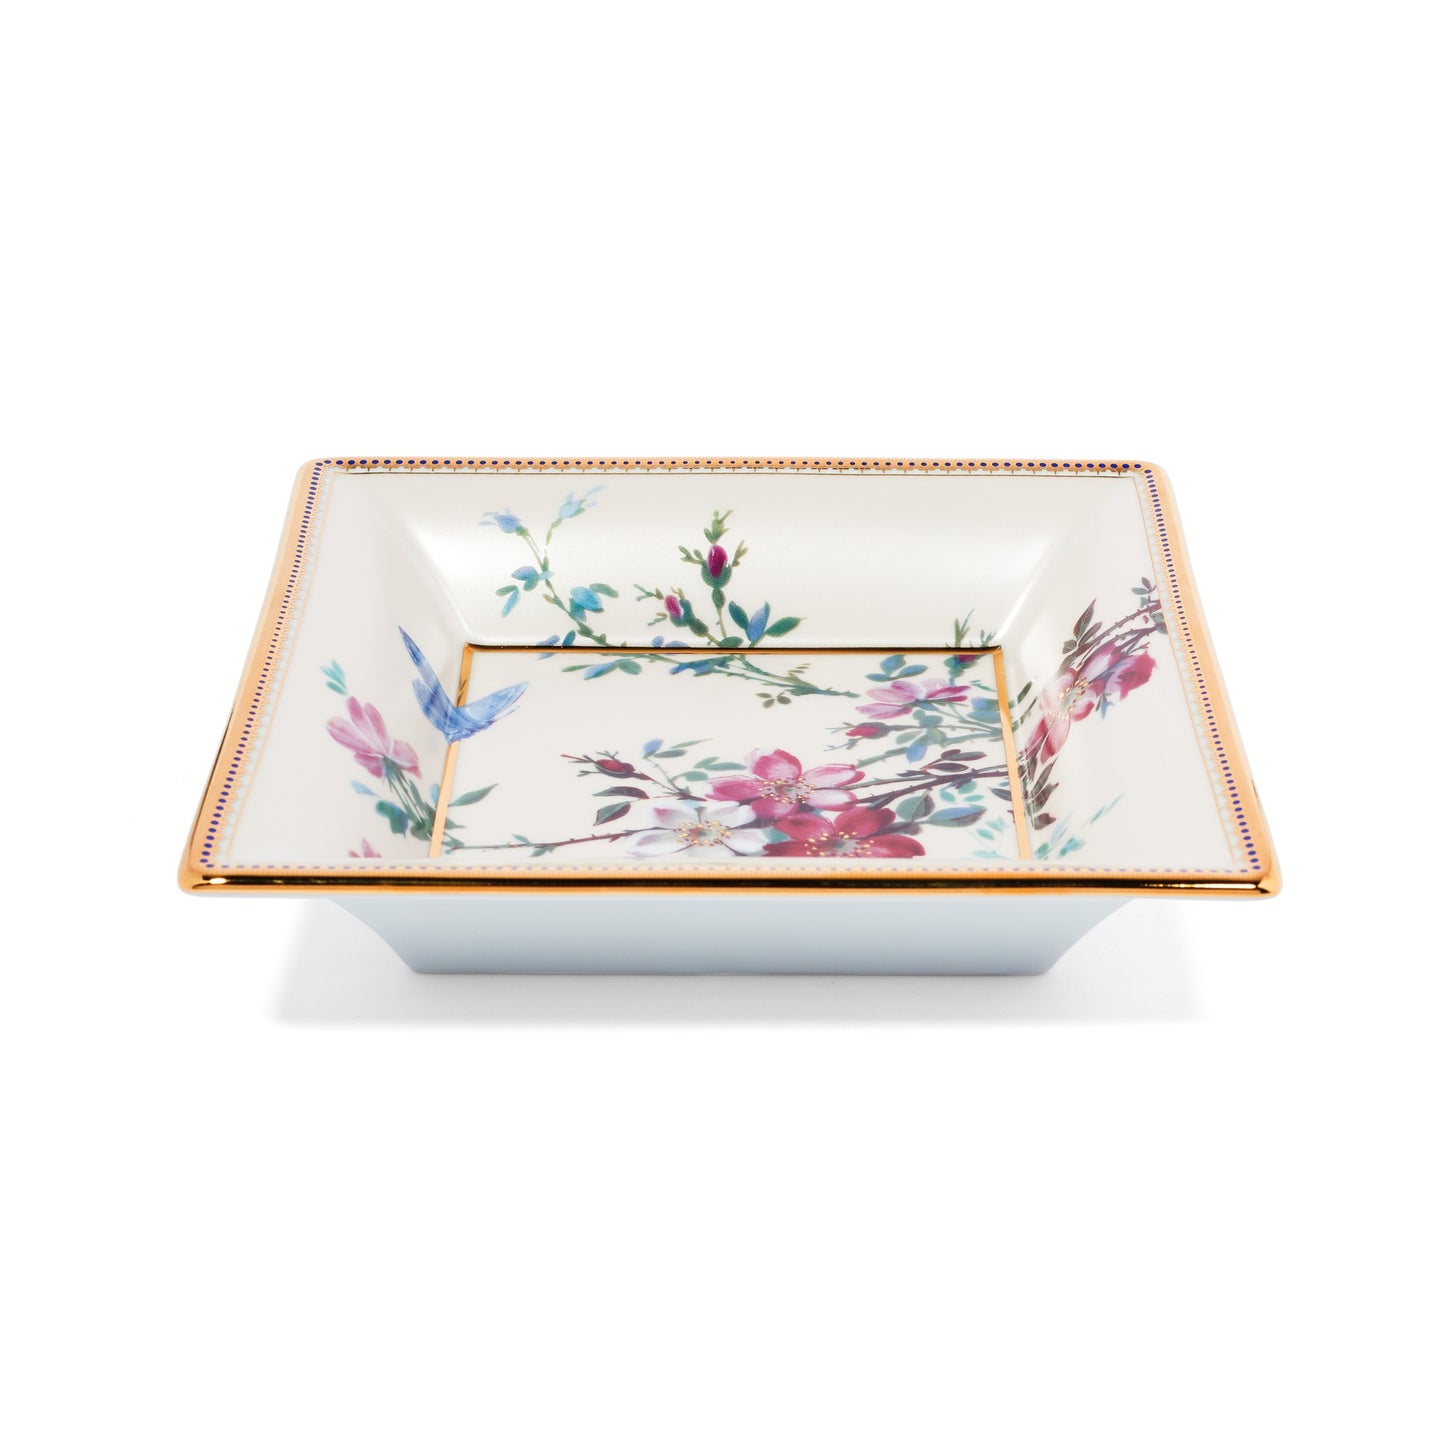 Patek Philippe Rare 'Vide-poches' Limoges Porcelain and Enamel Dish Plate Collection 2016